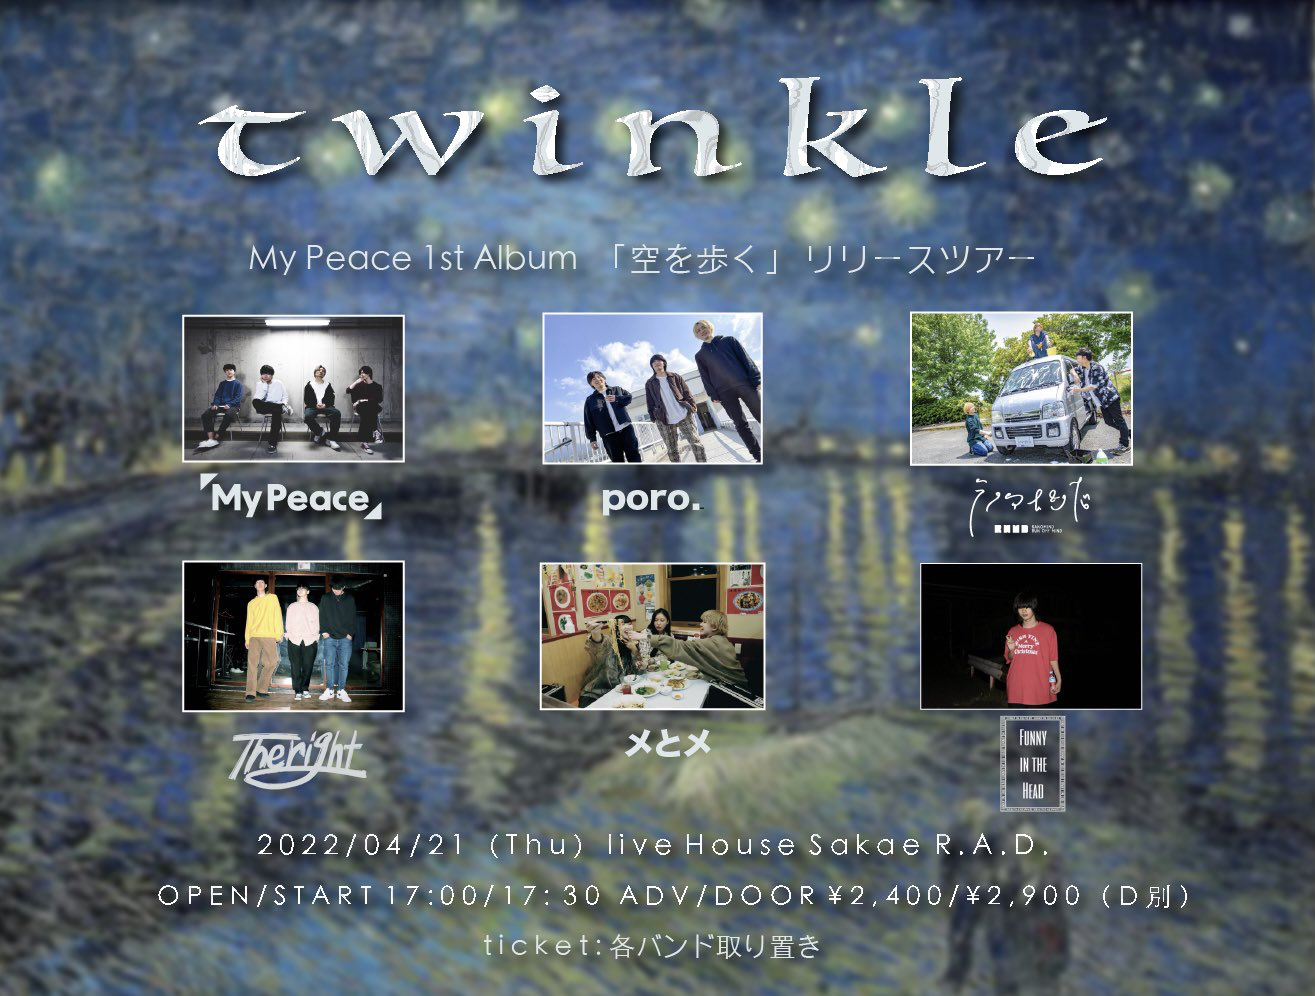 Twinkle My Peace 1st album ｢空を歩く｣リリースツアー